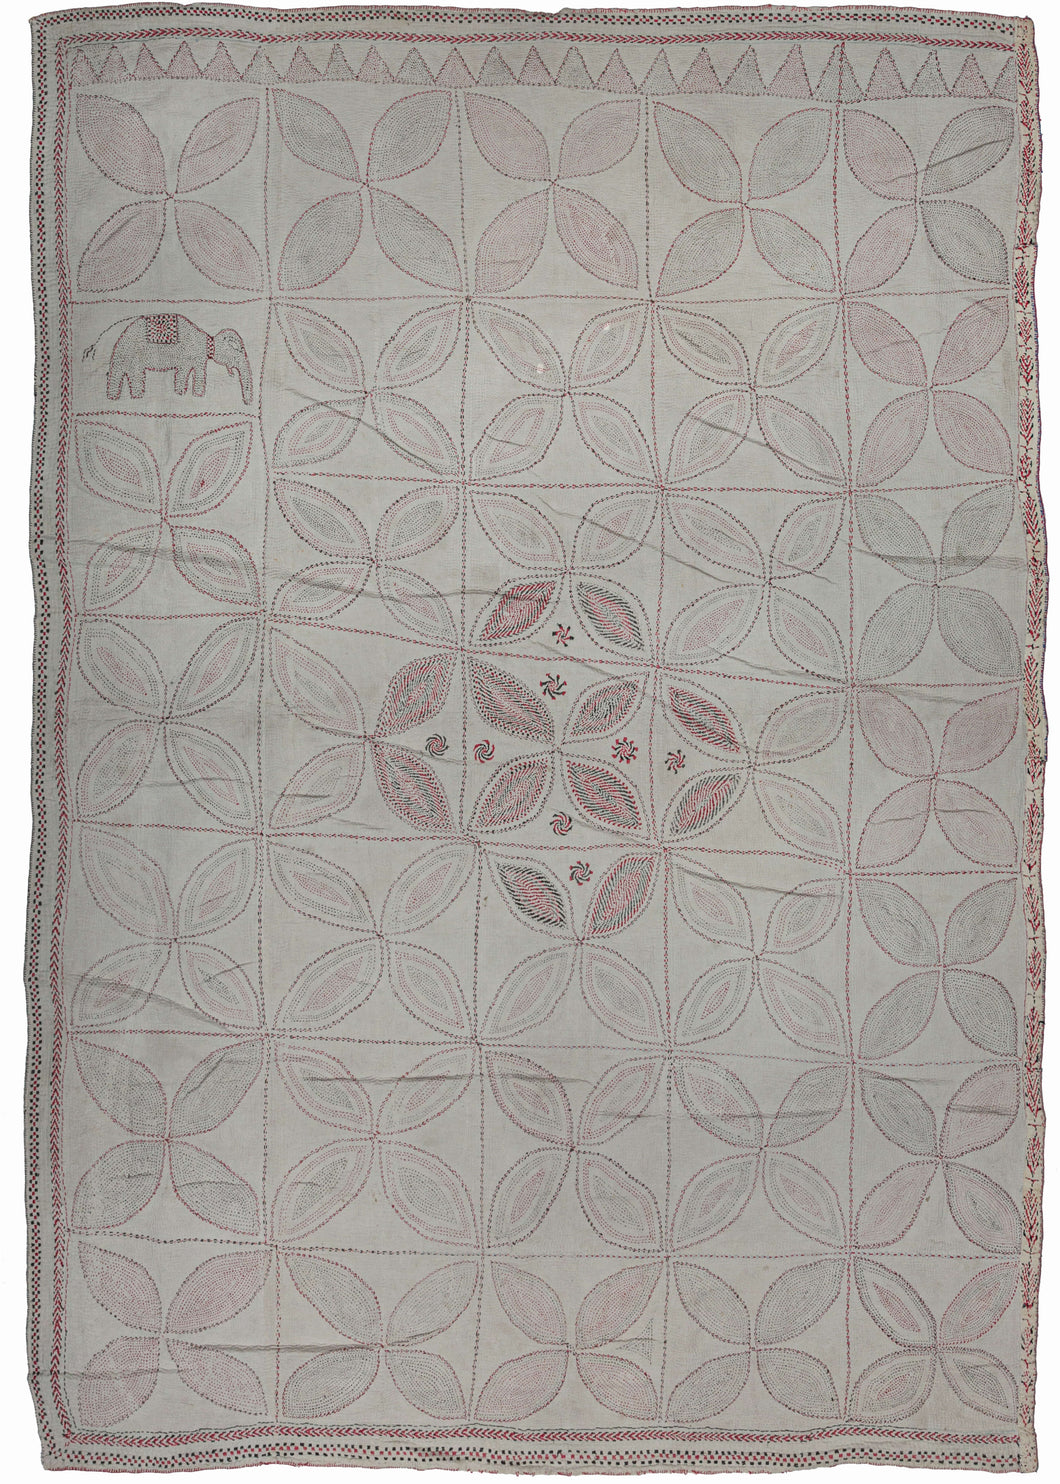 large Antique Bengali Kantha featuring a repeat pattern of quatrefoils in a grid. It has a limited palette of various red and black threads on a plain white cotton ground which is subtle but intriguing. The stitching gets fuller and more saturated in the center and small pinwheel motifs have been added giving the piece a more traditional focal point. The patterning is broken in a section in which the inclusion of an elephant adds some interest.